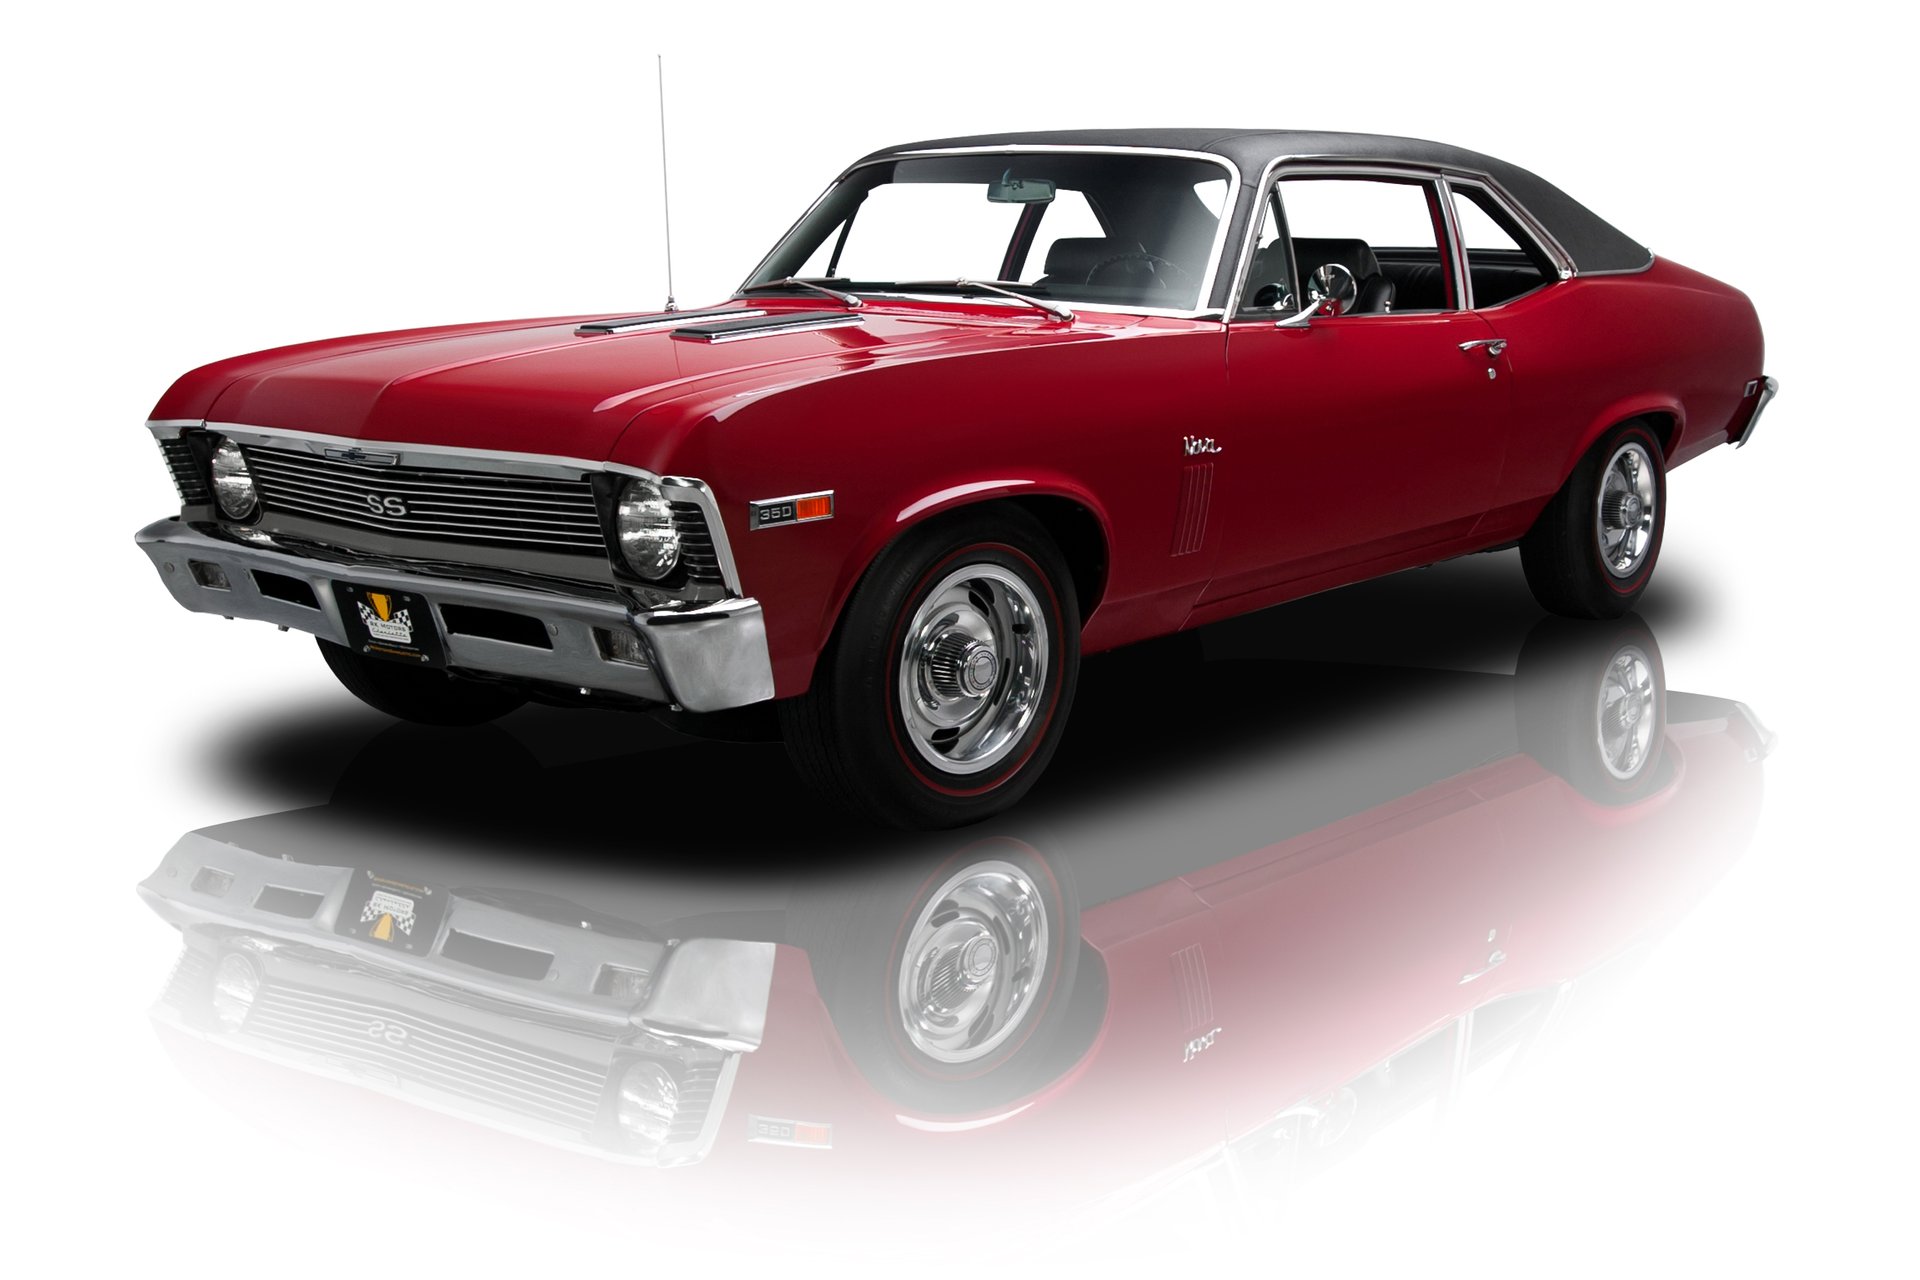 134270-1969-chevrolet-nova-rk-motors-classic-cars-and-muscle-cars-for-sale